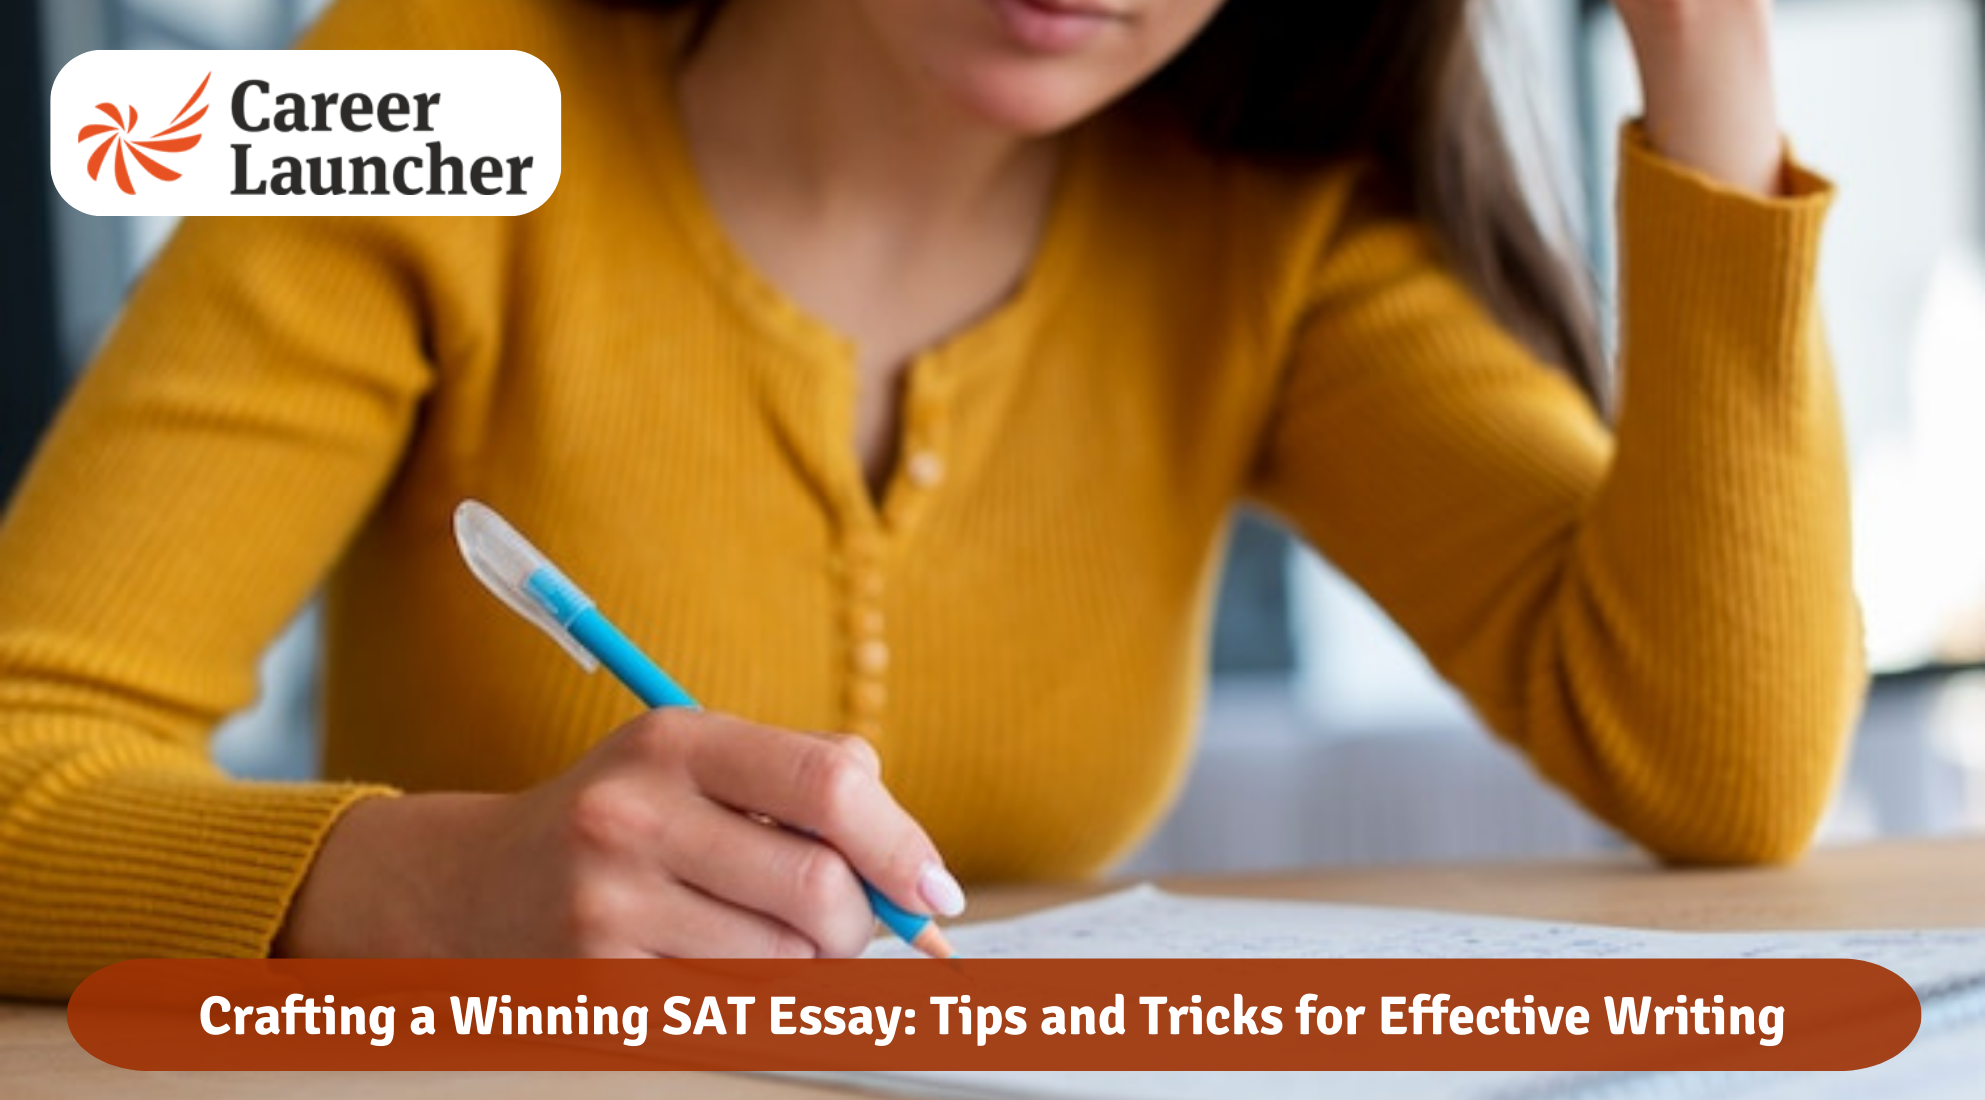 Crafting a Winning SAT Essay: Tips and Tricks for Effective Writing